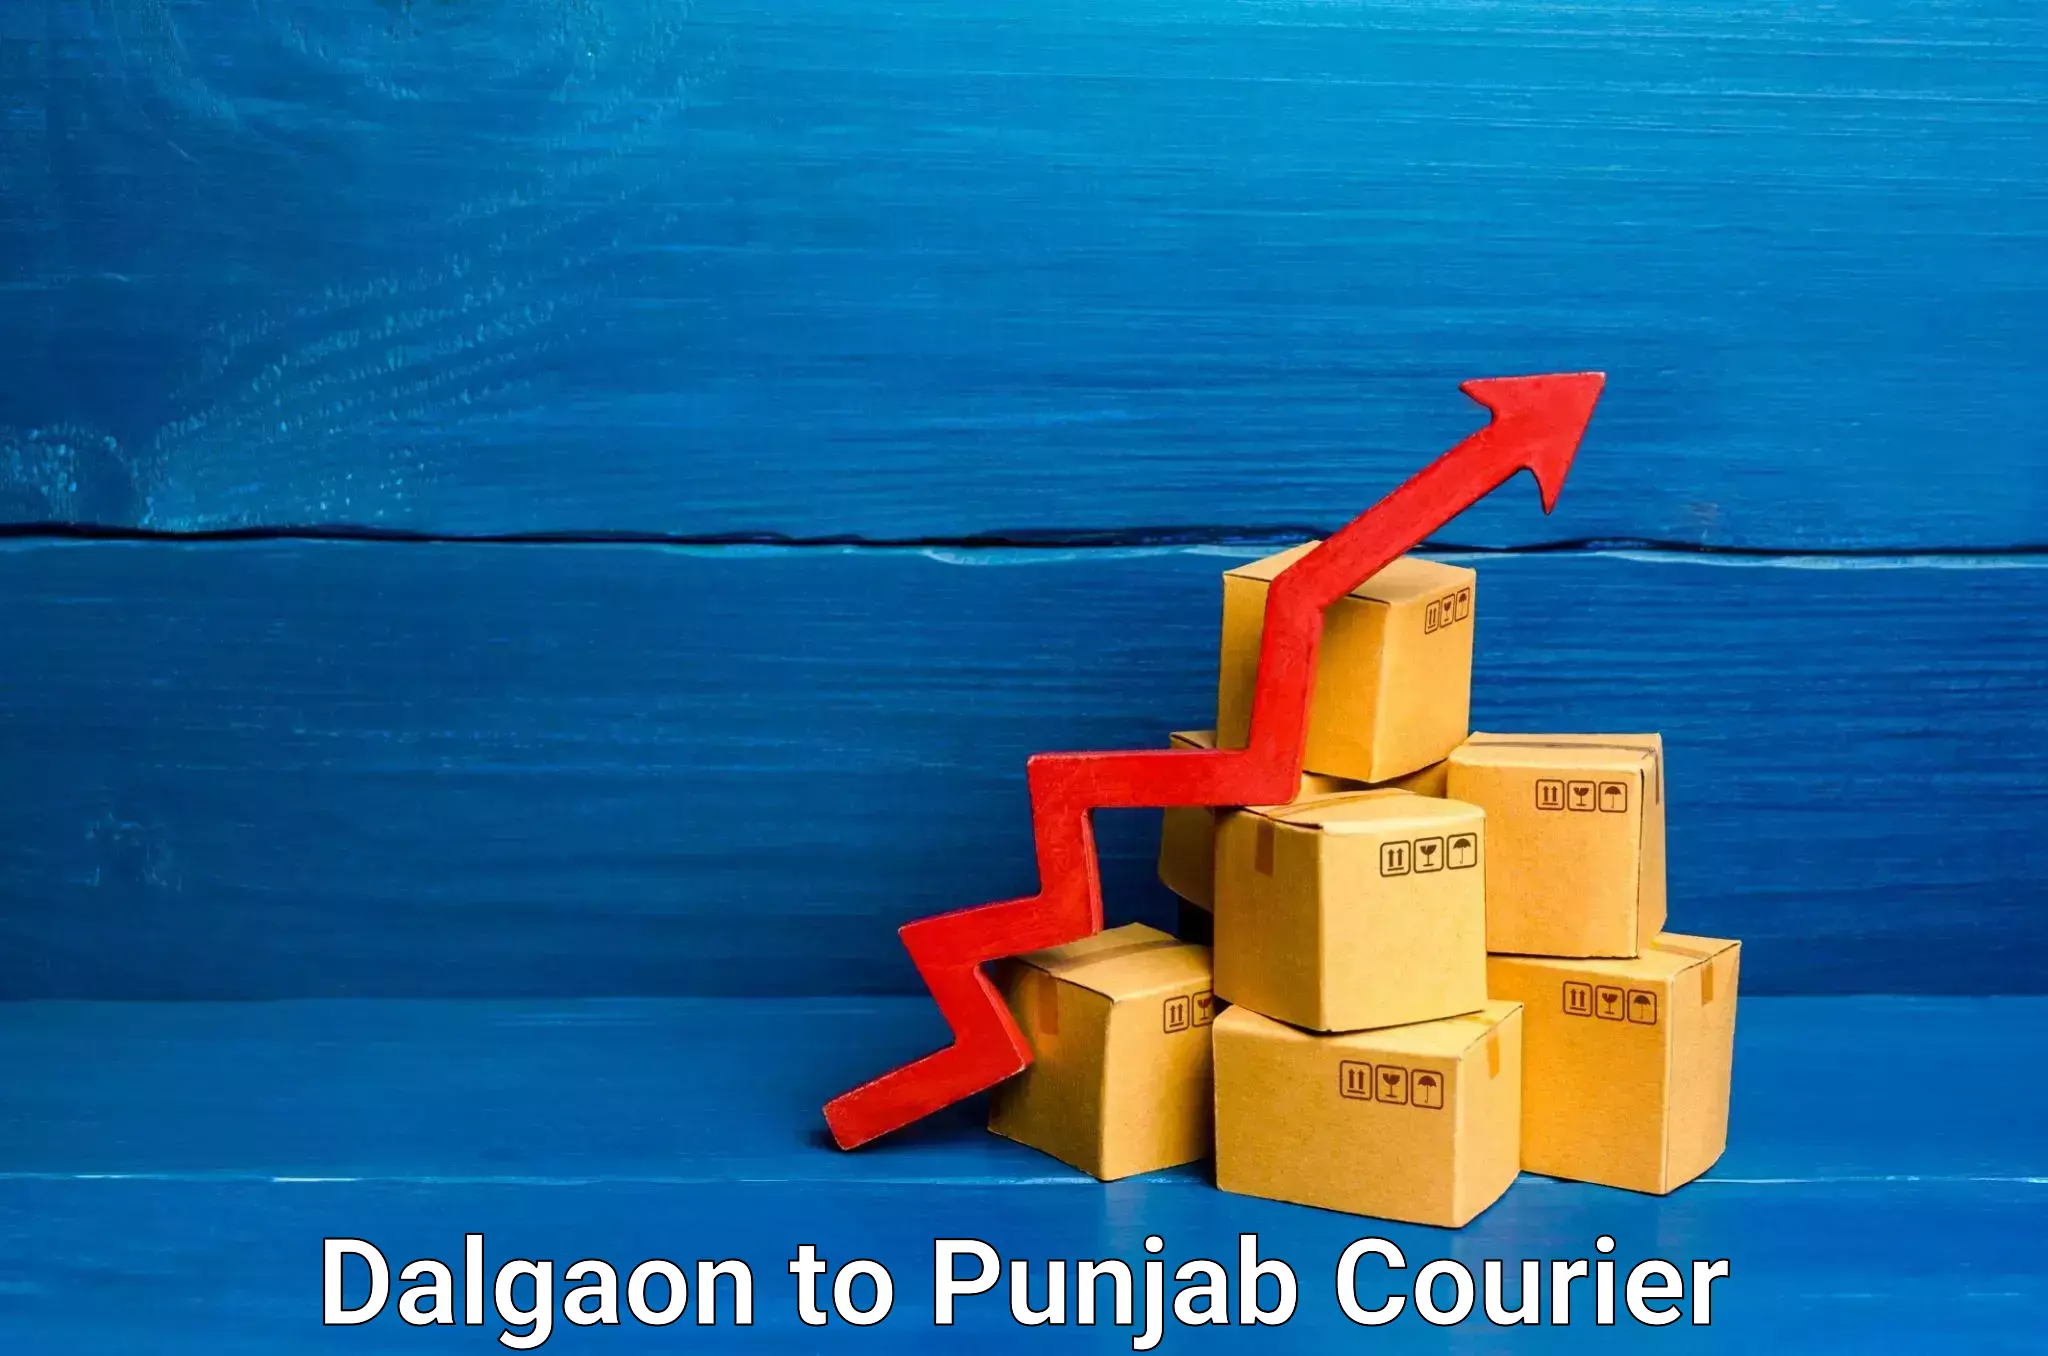 Express delivery capabilities Dalgaon to Pathankot